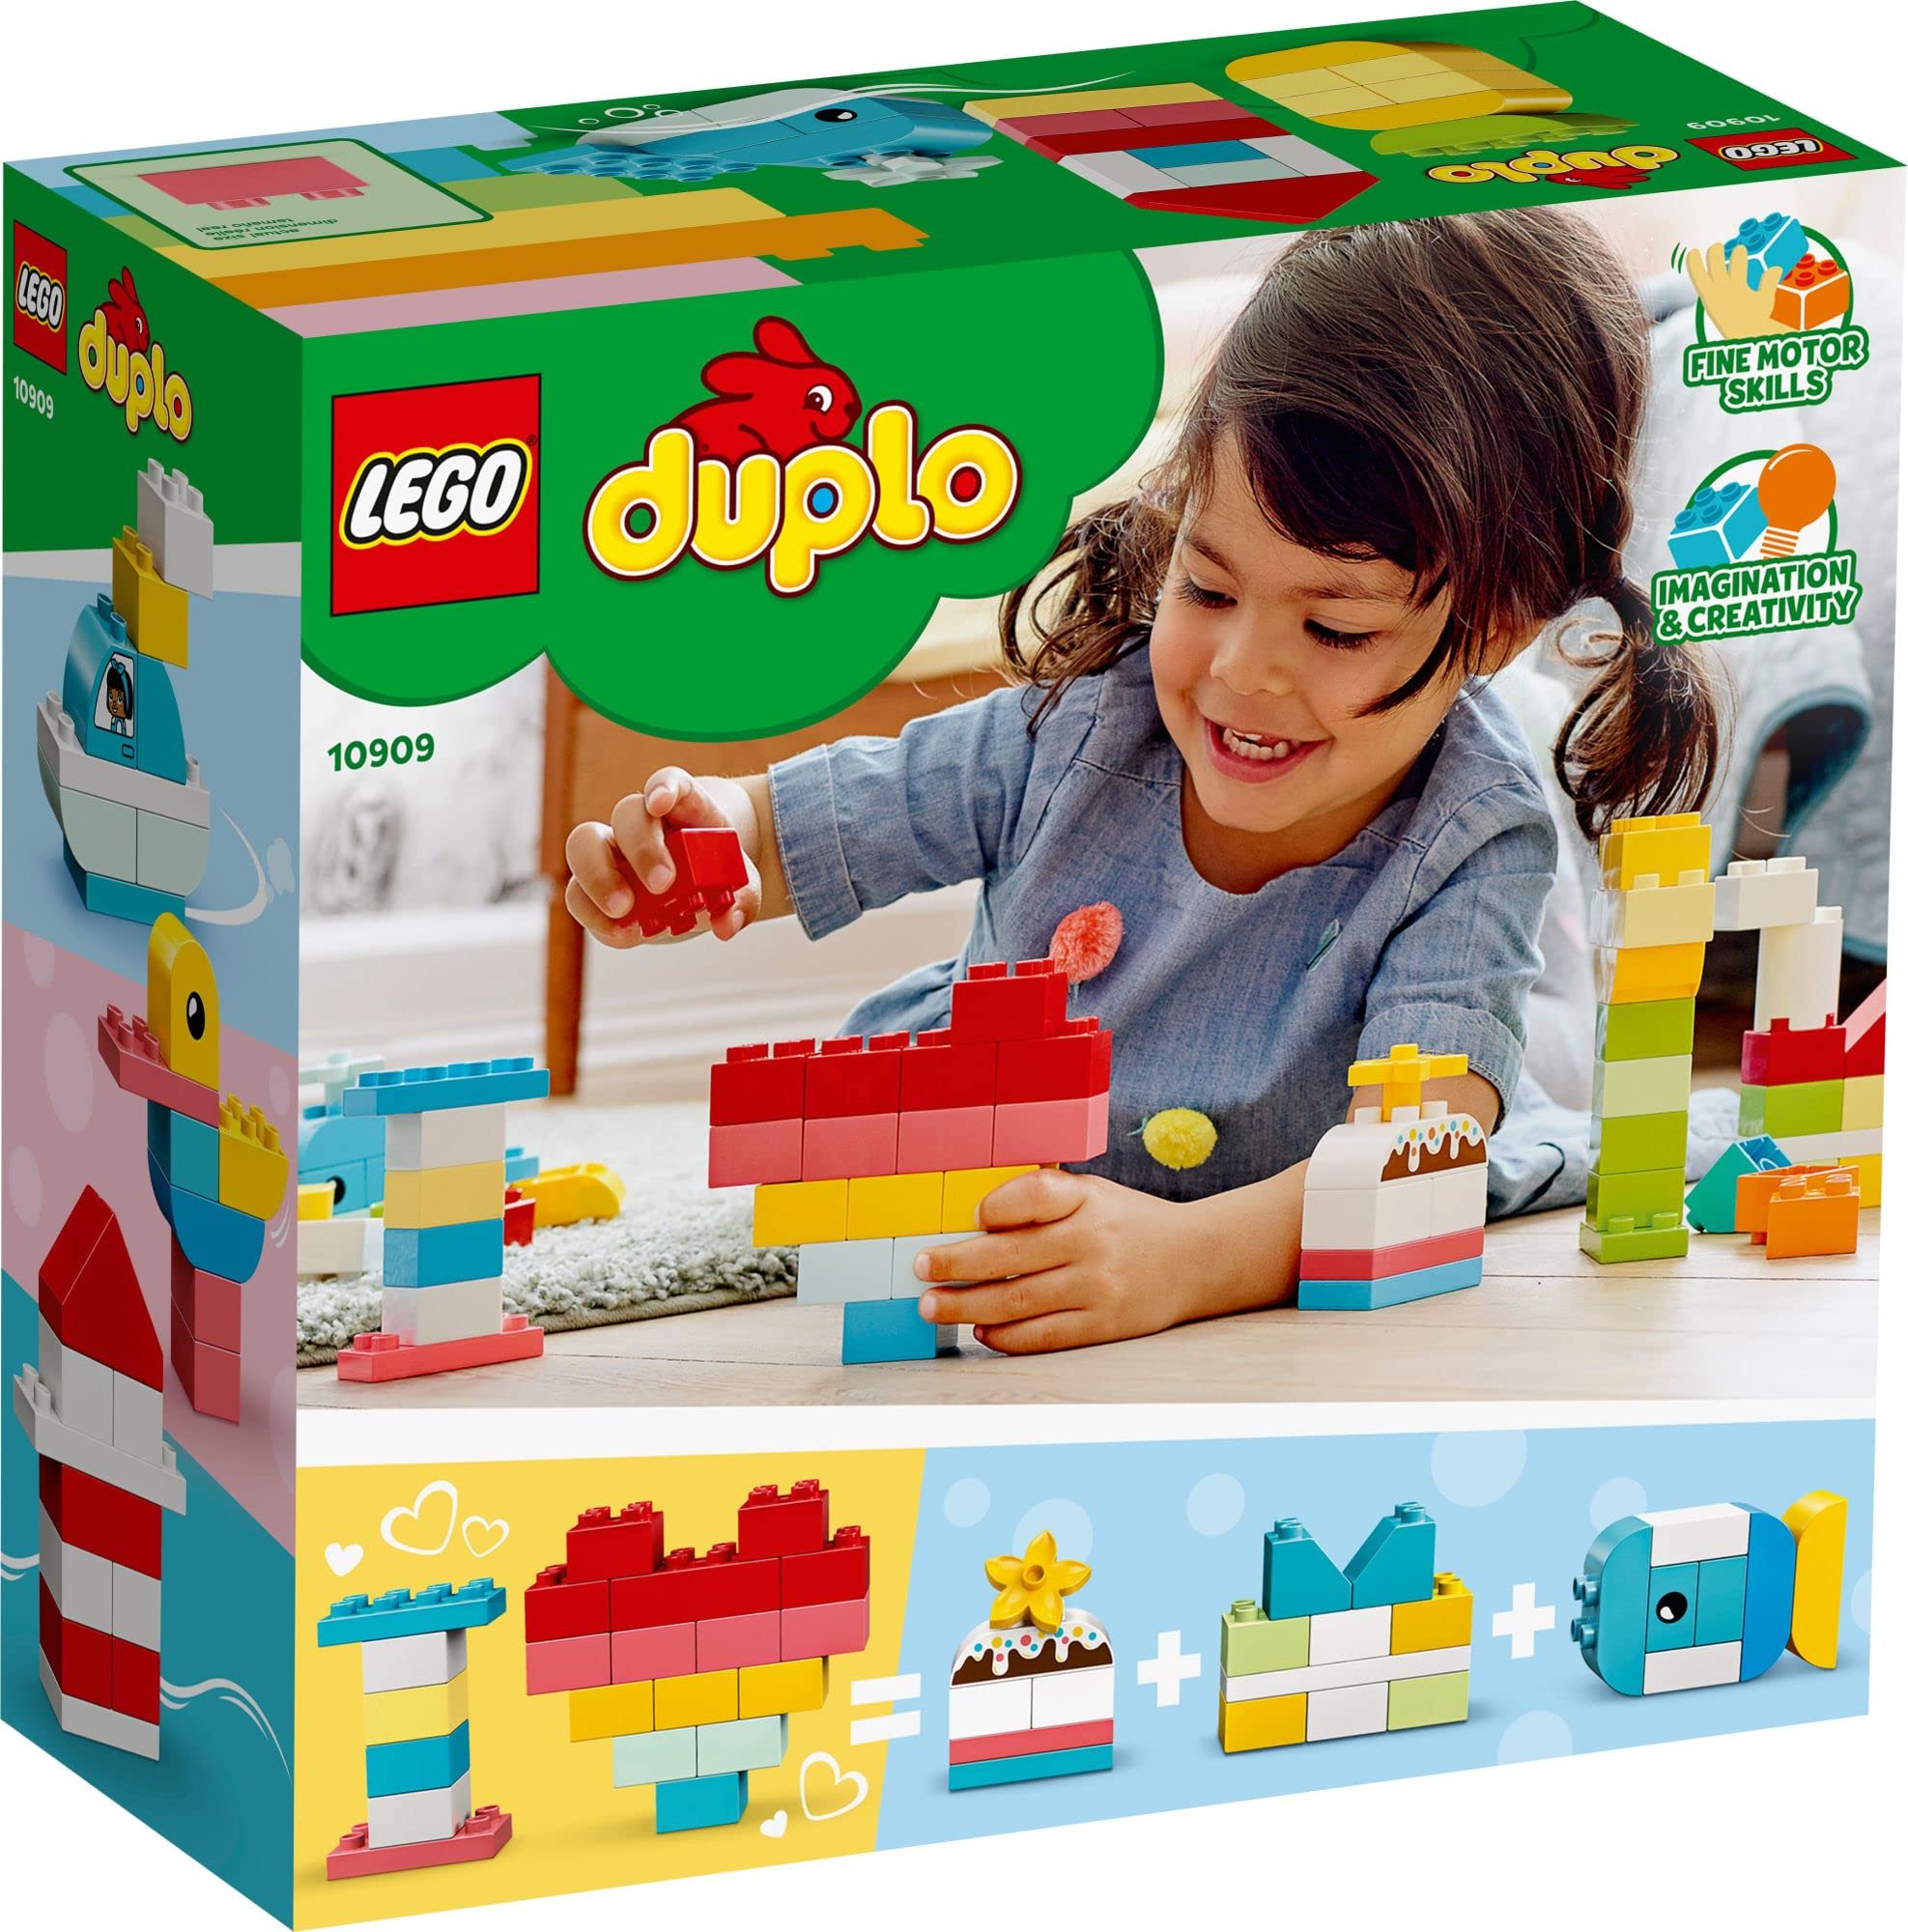 LEGO DUPLO Classic Heart Box 10909, First Bricks Building Toy, Educational Activity and Development Set, Early Learning Toys for Toddlers 1.5-3 Years Old